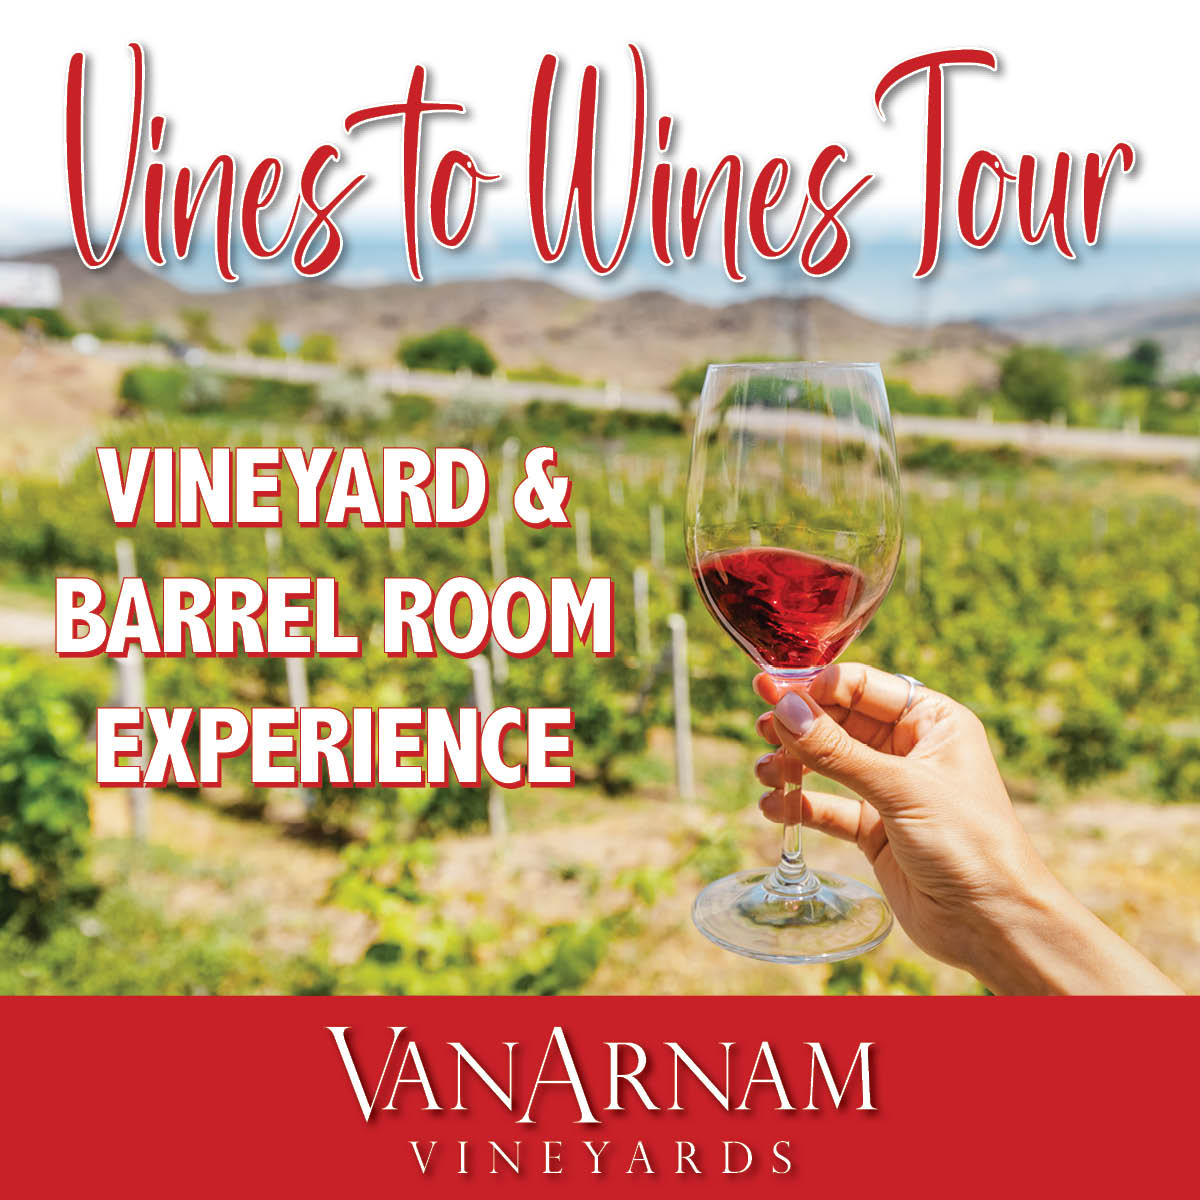 Product Image for Vines to Wines Tour - Sunday, June 19th 1:00 PM